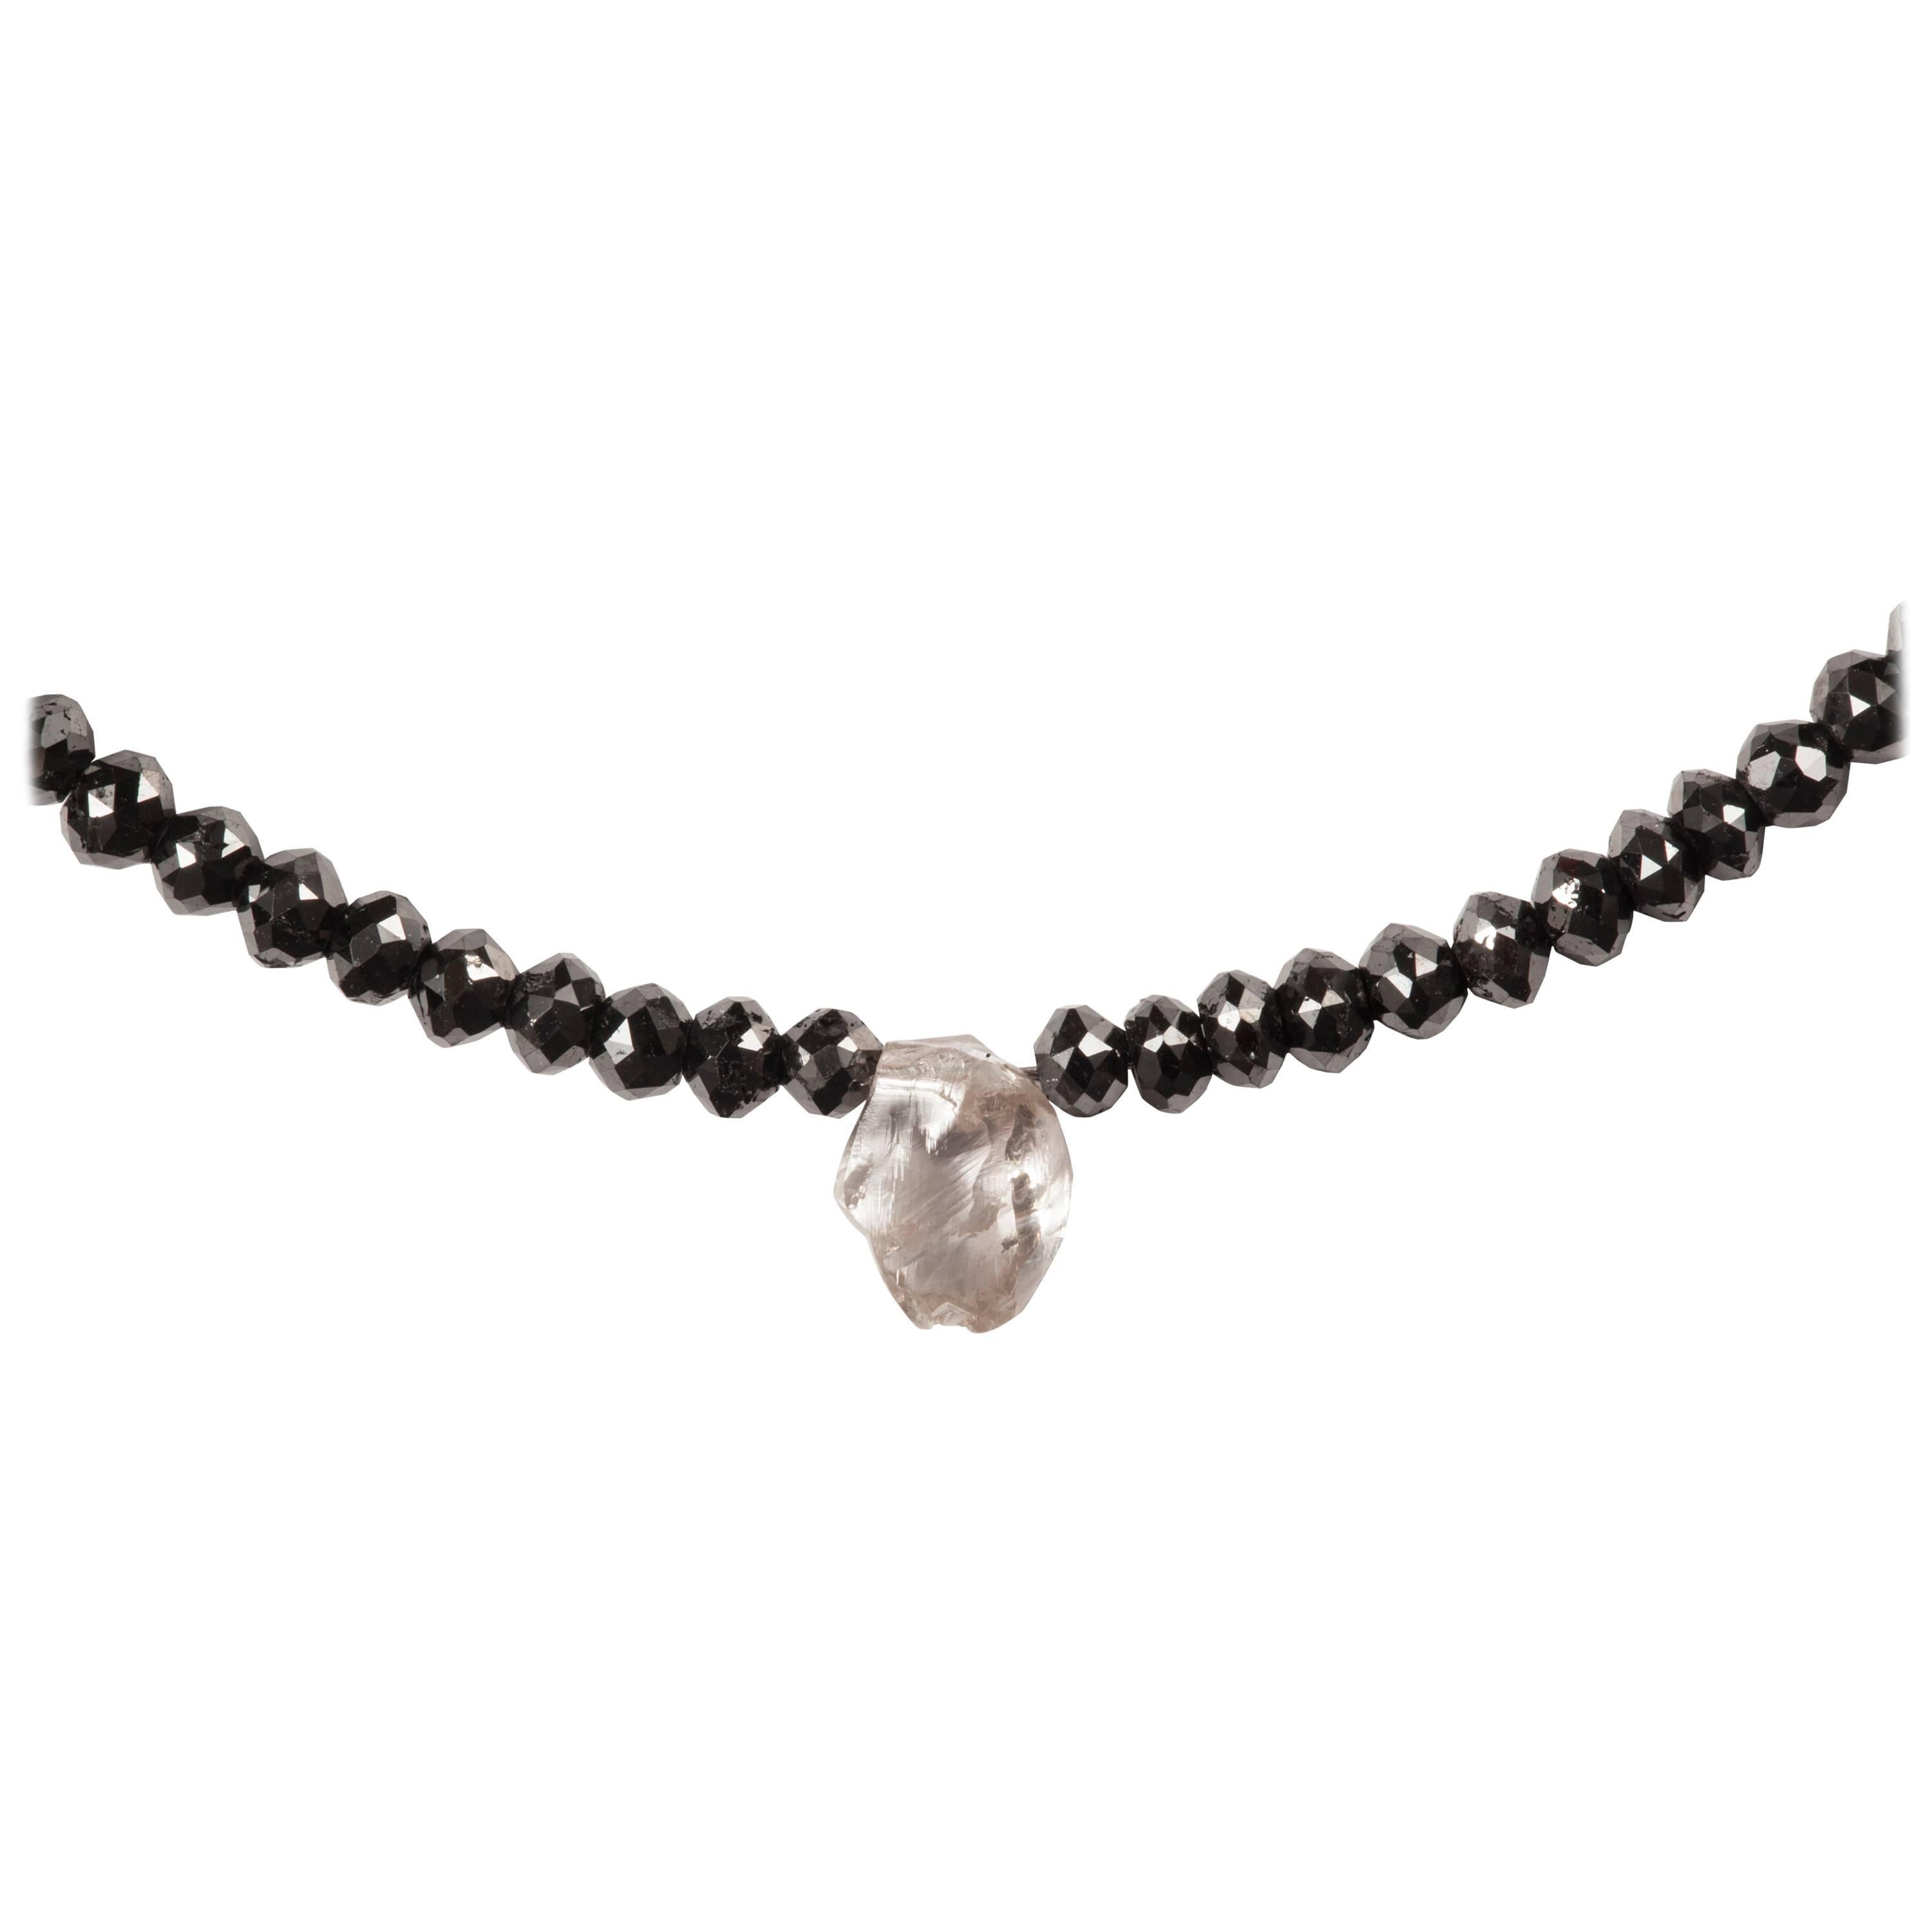 1.50 Carat Rough White and 32.24 Carat Facetted Black Diamond Collier Necklace For Sale